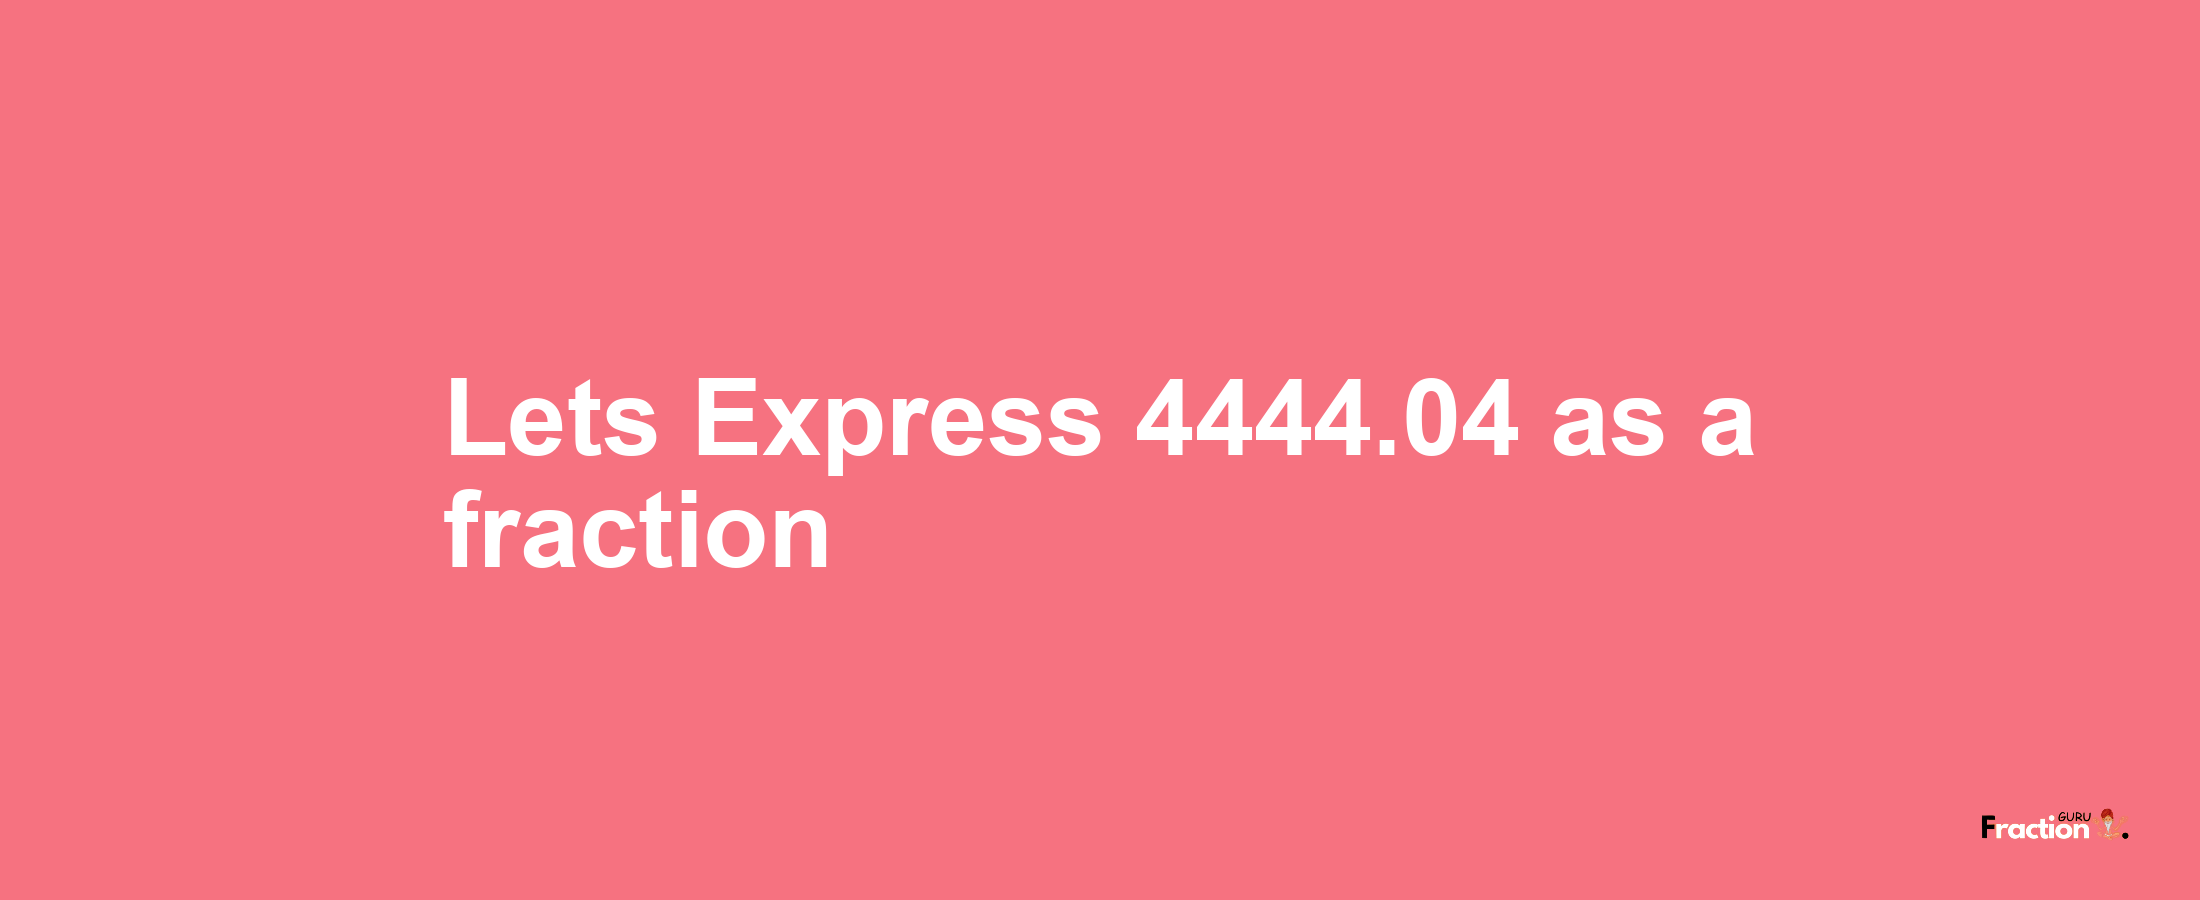 Lets Express 4444.04 as afraction